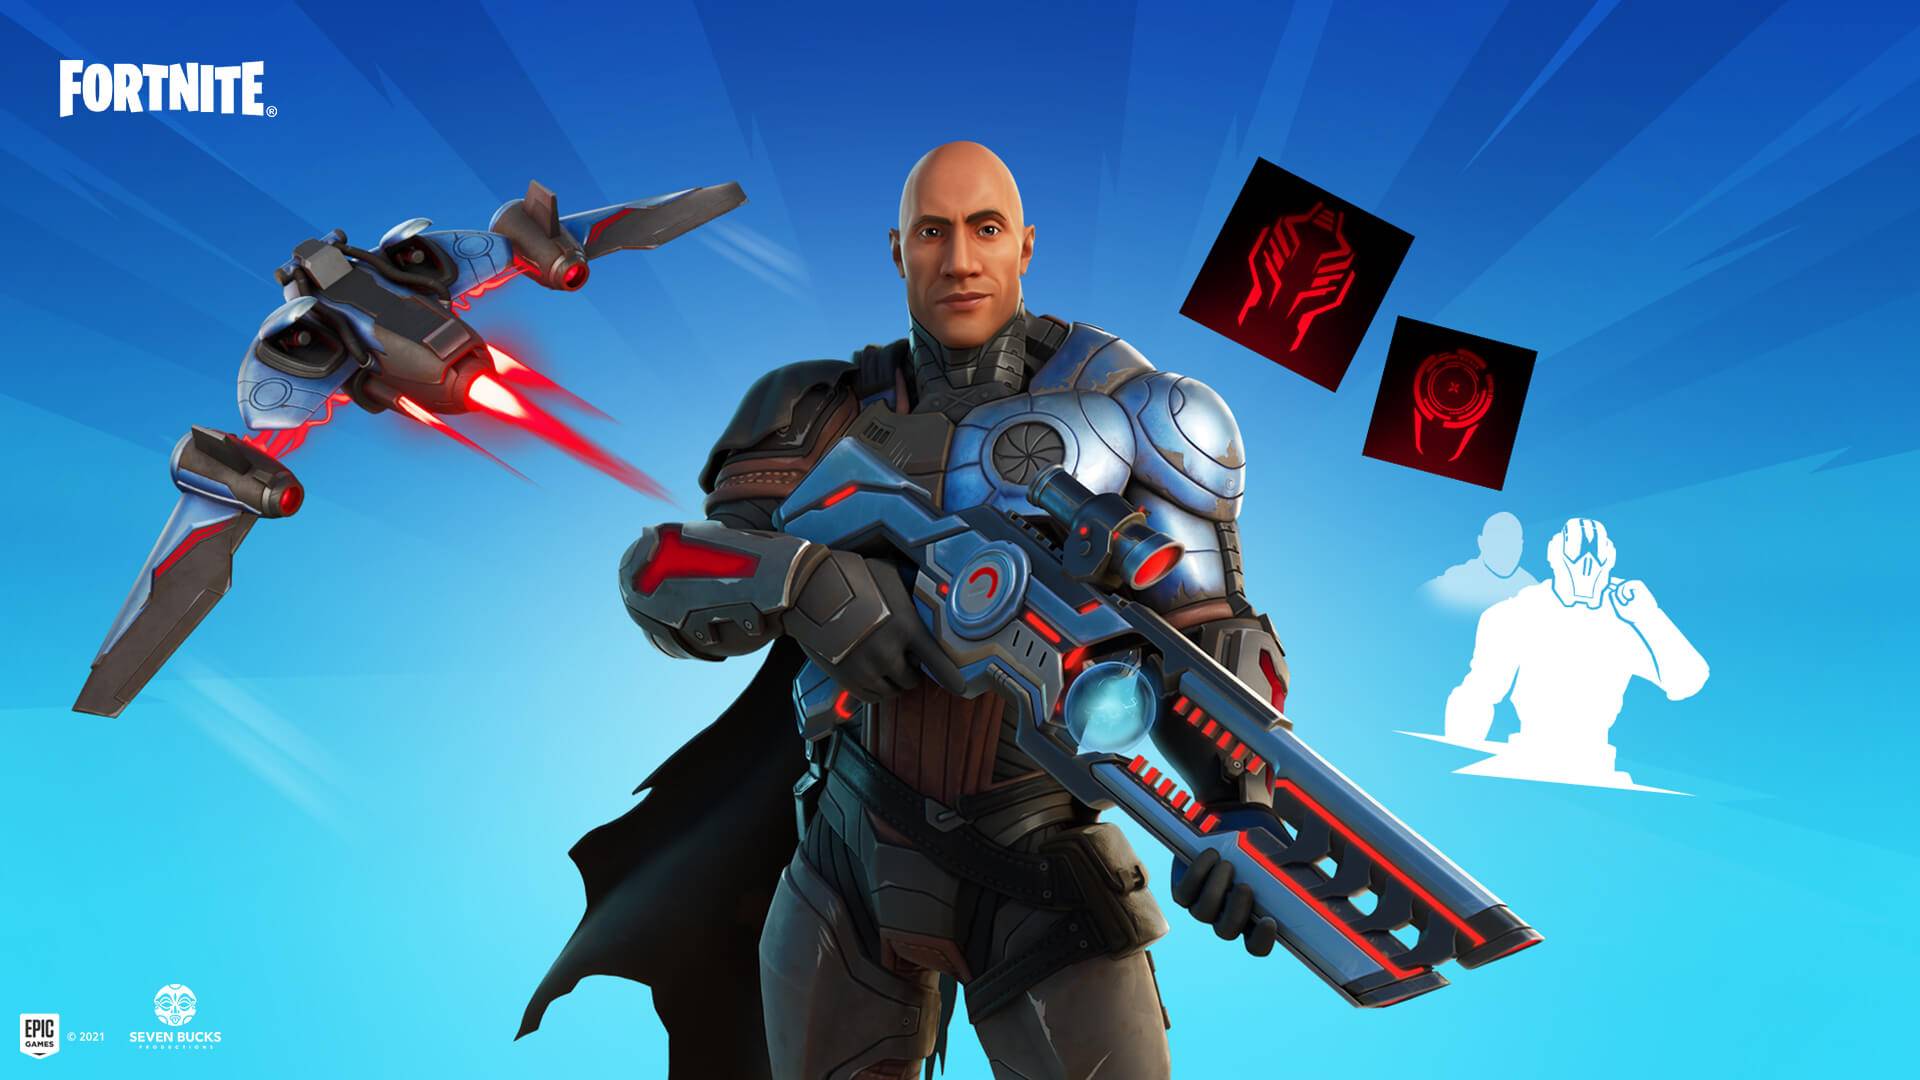 Fortnite’s New Skin - Can You Smell, What The Rock, Is Cooking?